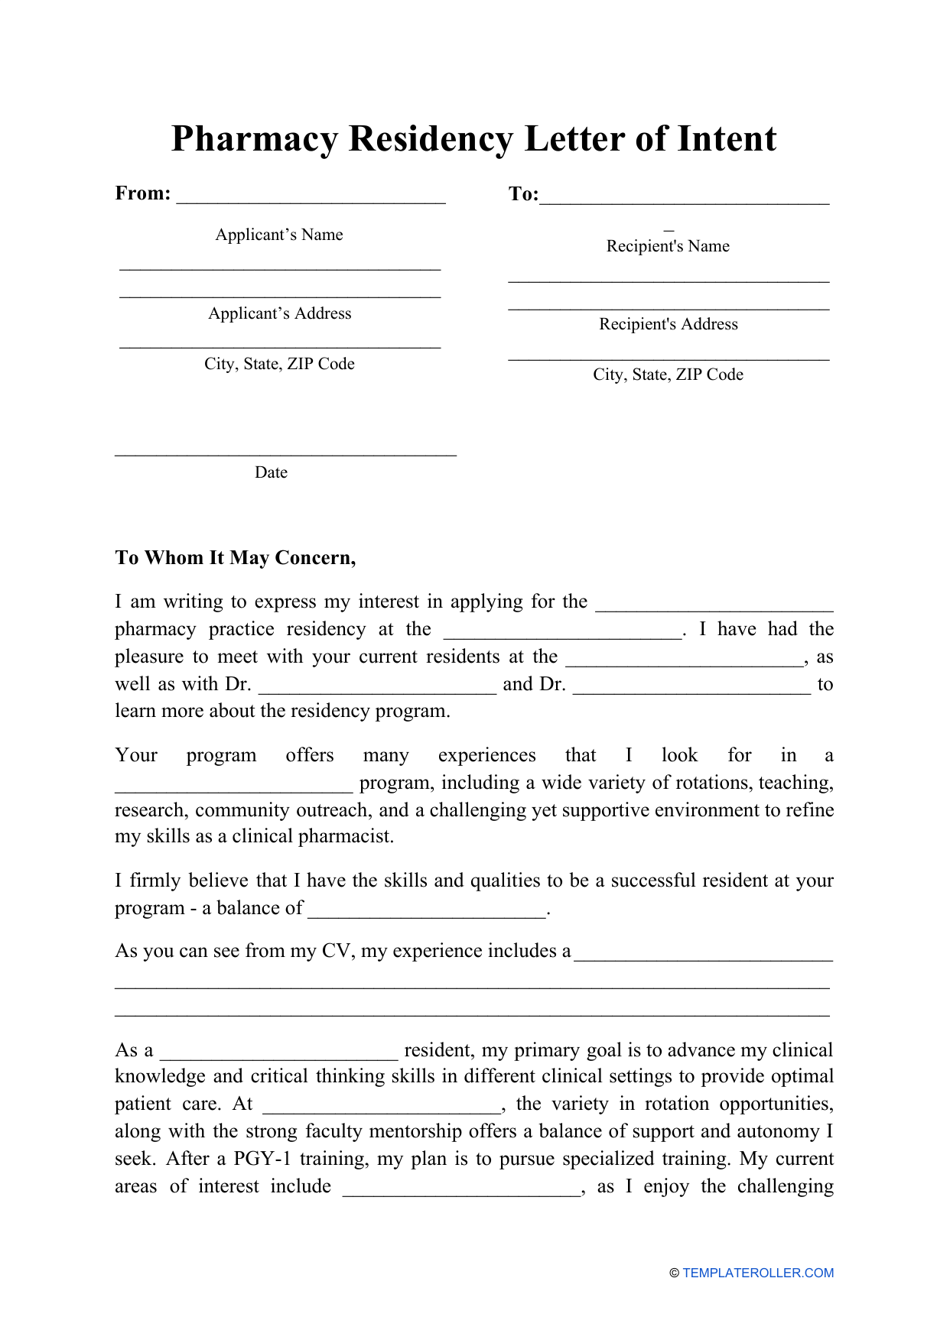 Pharmacy Residency Letter of Intent Template Preview Image